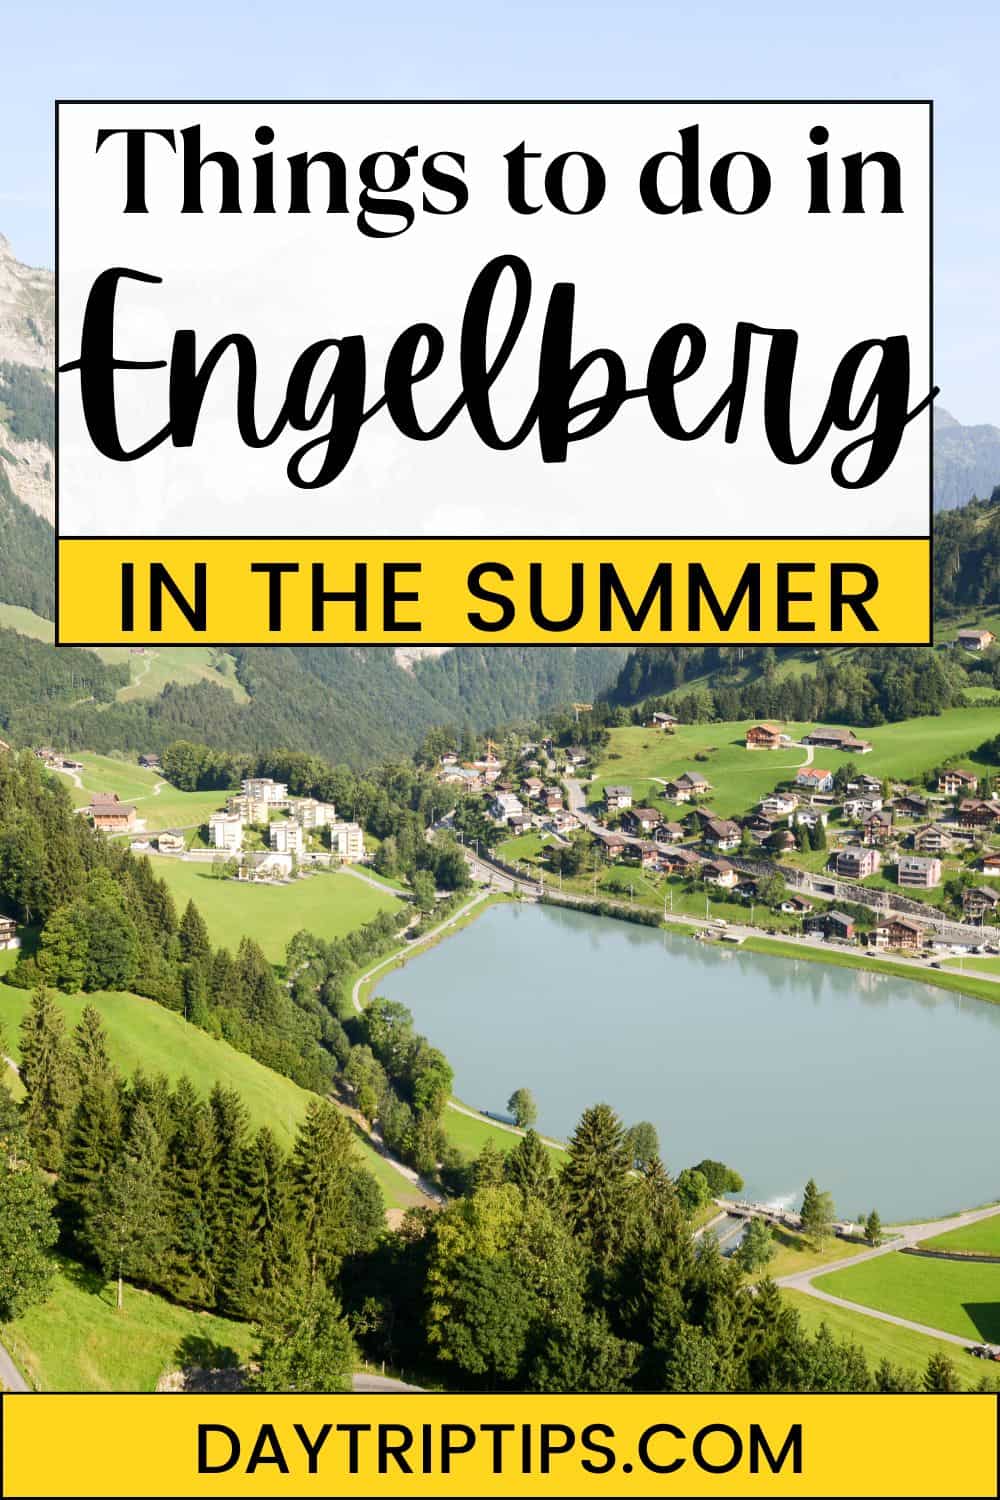 7 Things to do in Engelberg in the Summer